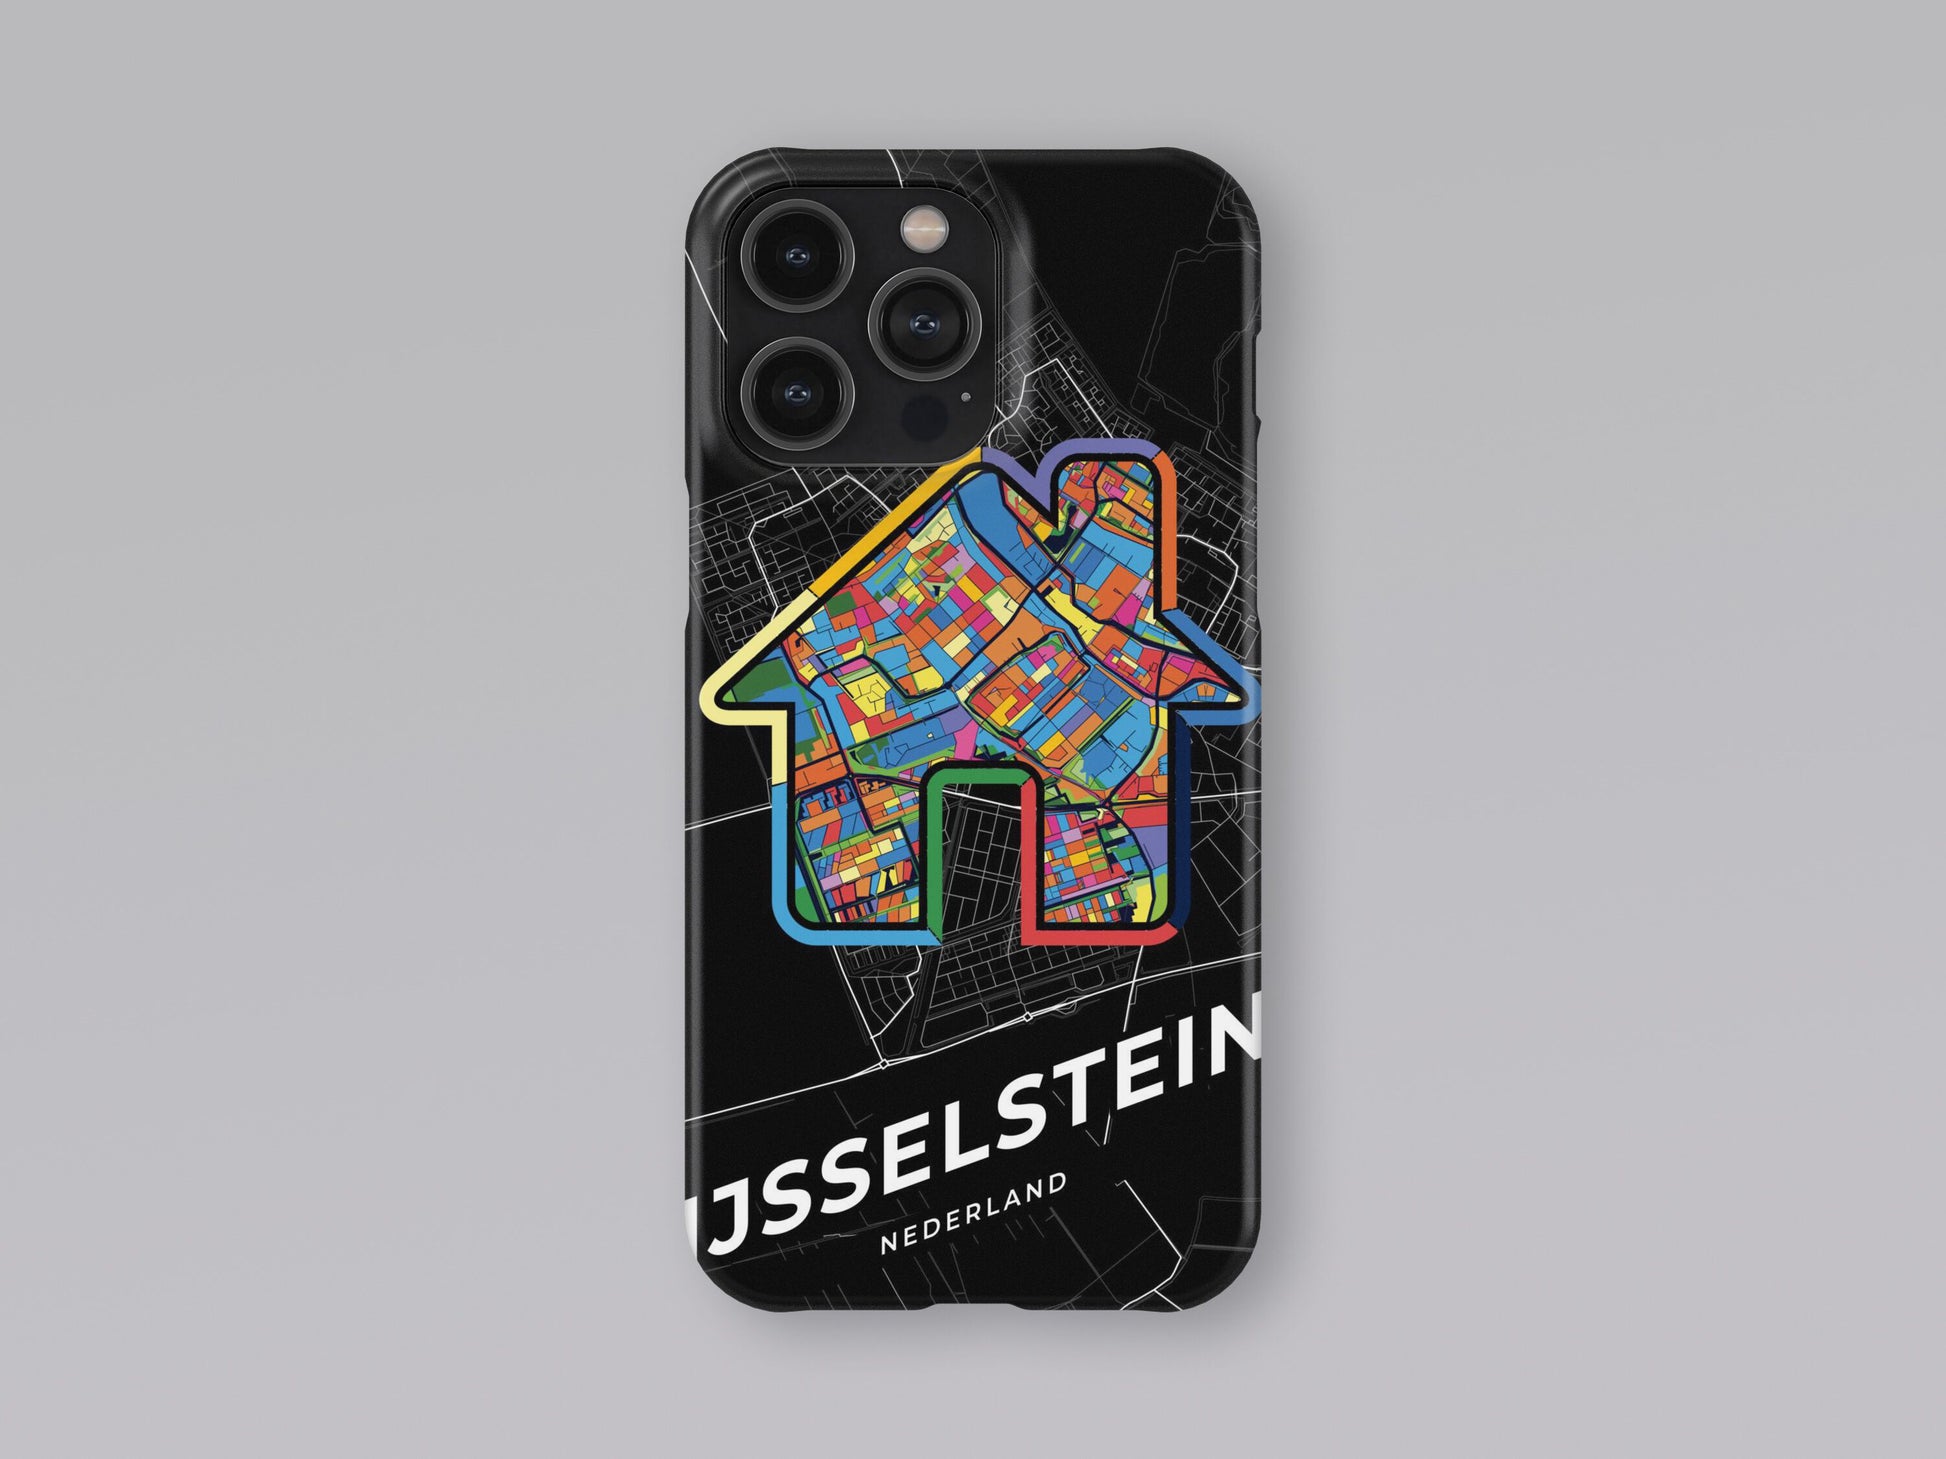 Ijsselstein Netherlands slim phone case with colorful icon. Birthday, wedding or housewarming gift. Couple match cases. 3